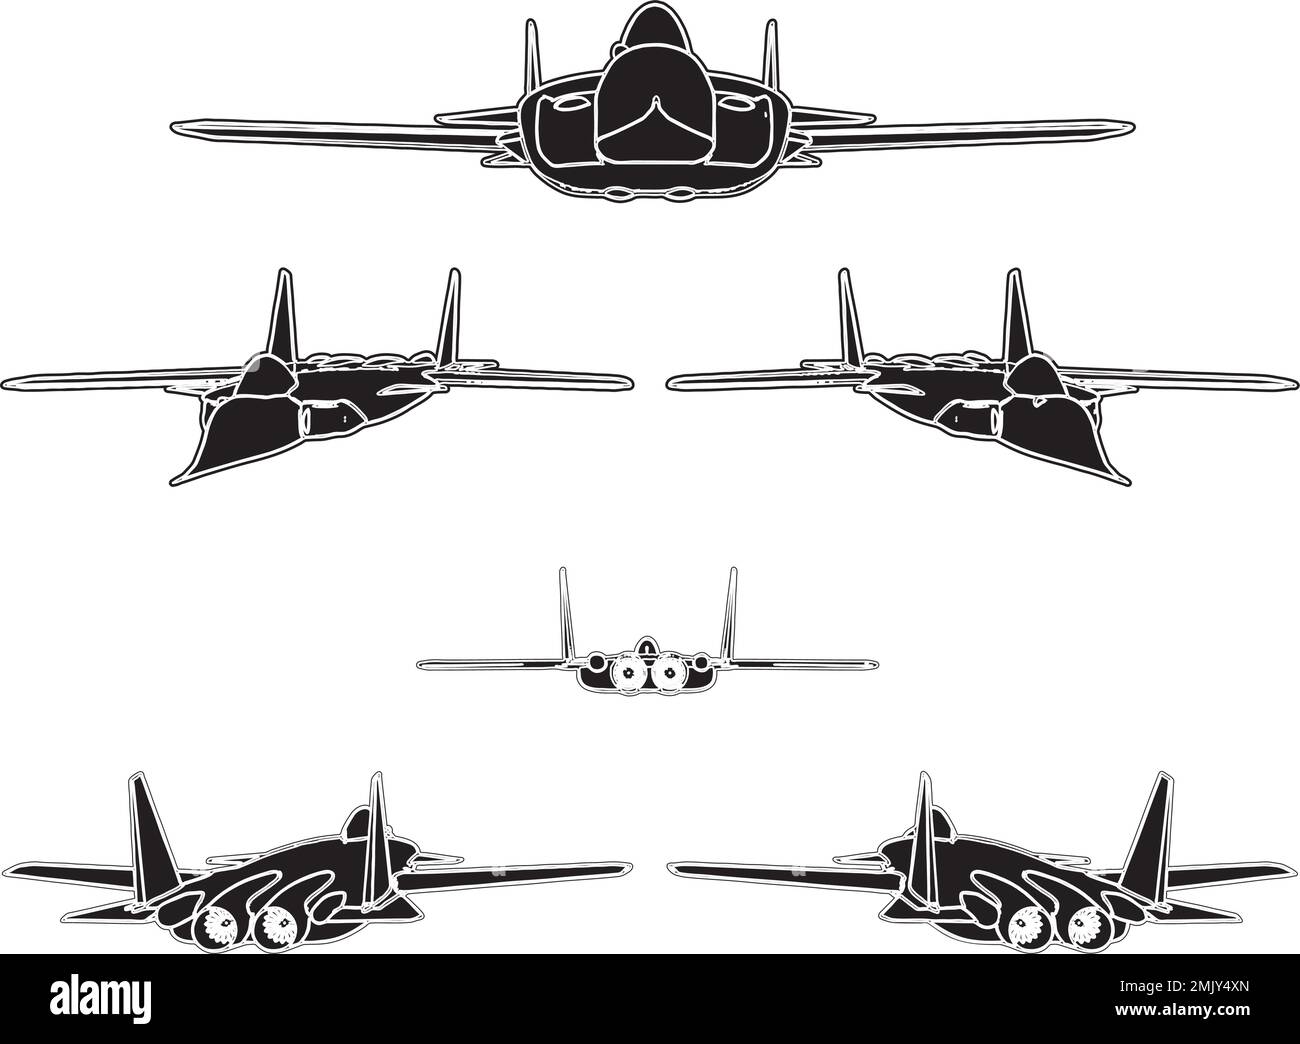 Military Airplanes Vector Stock Vector